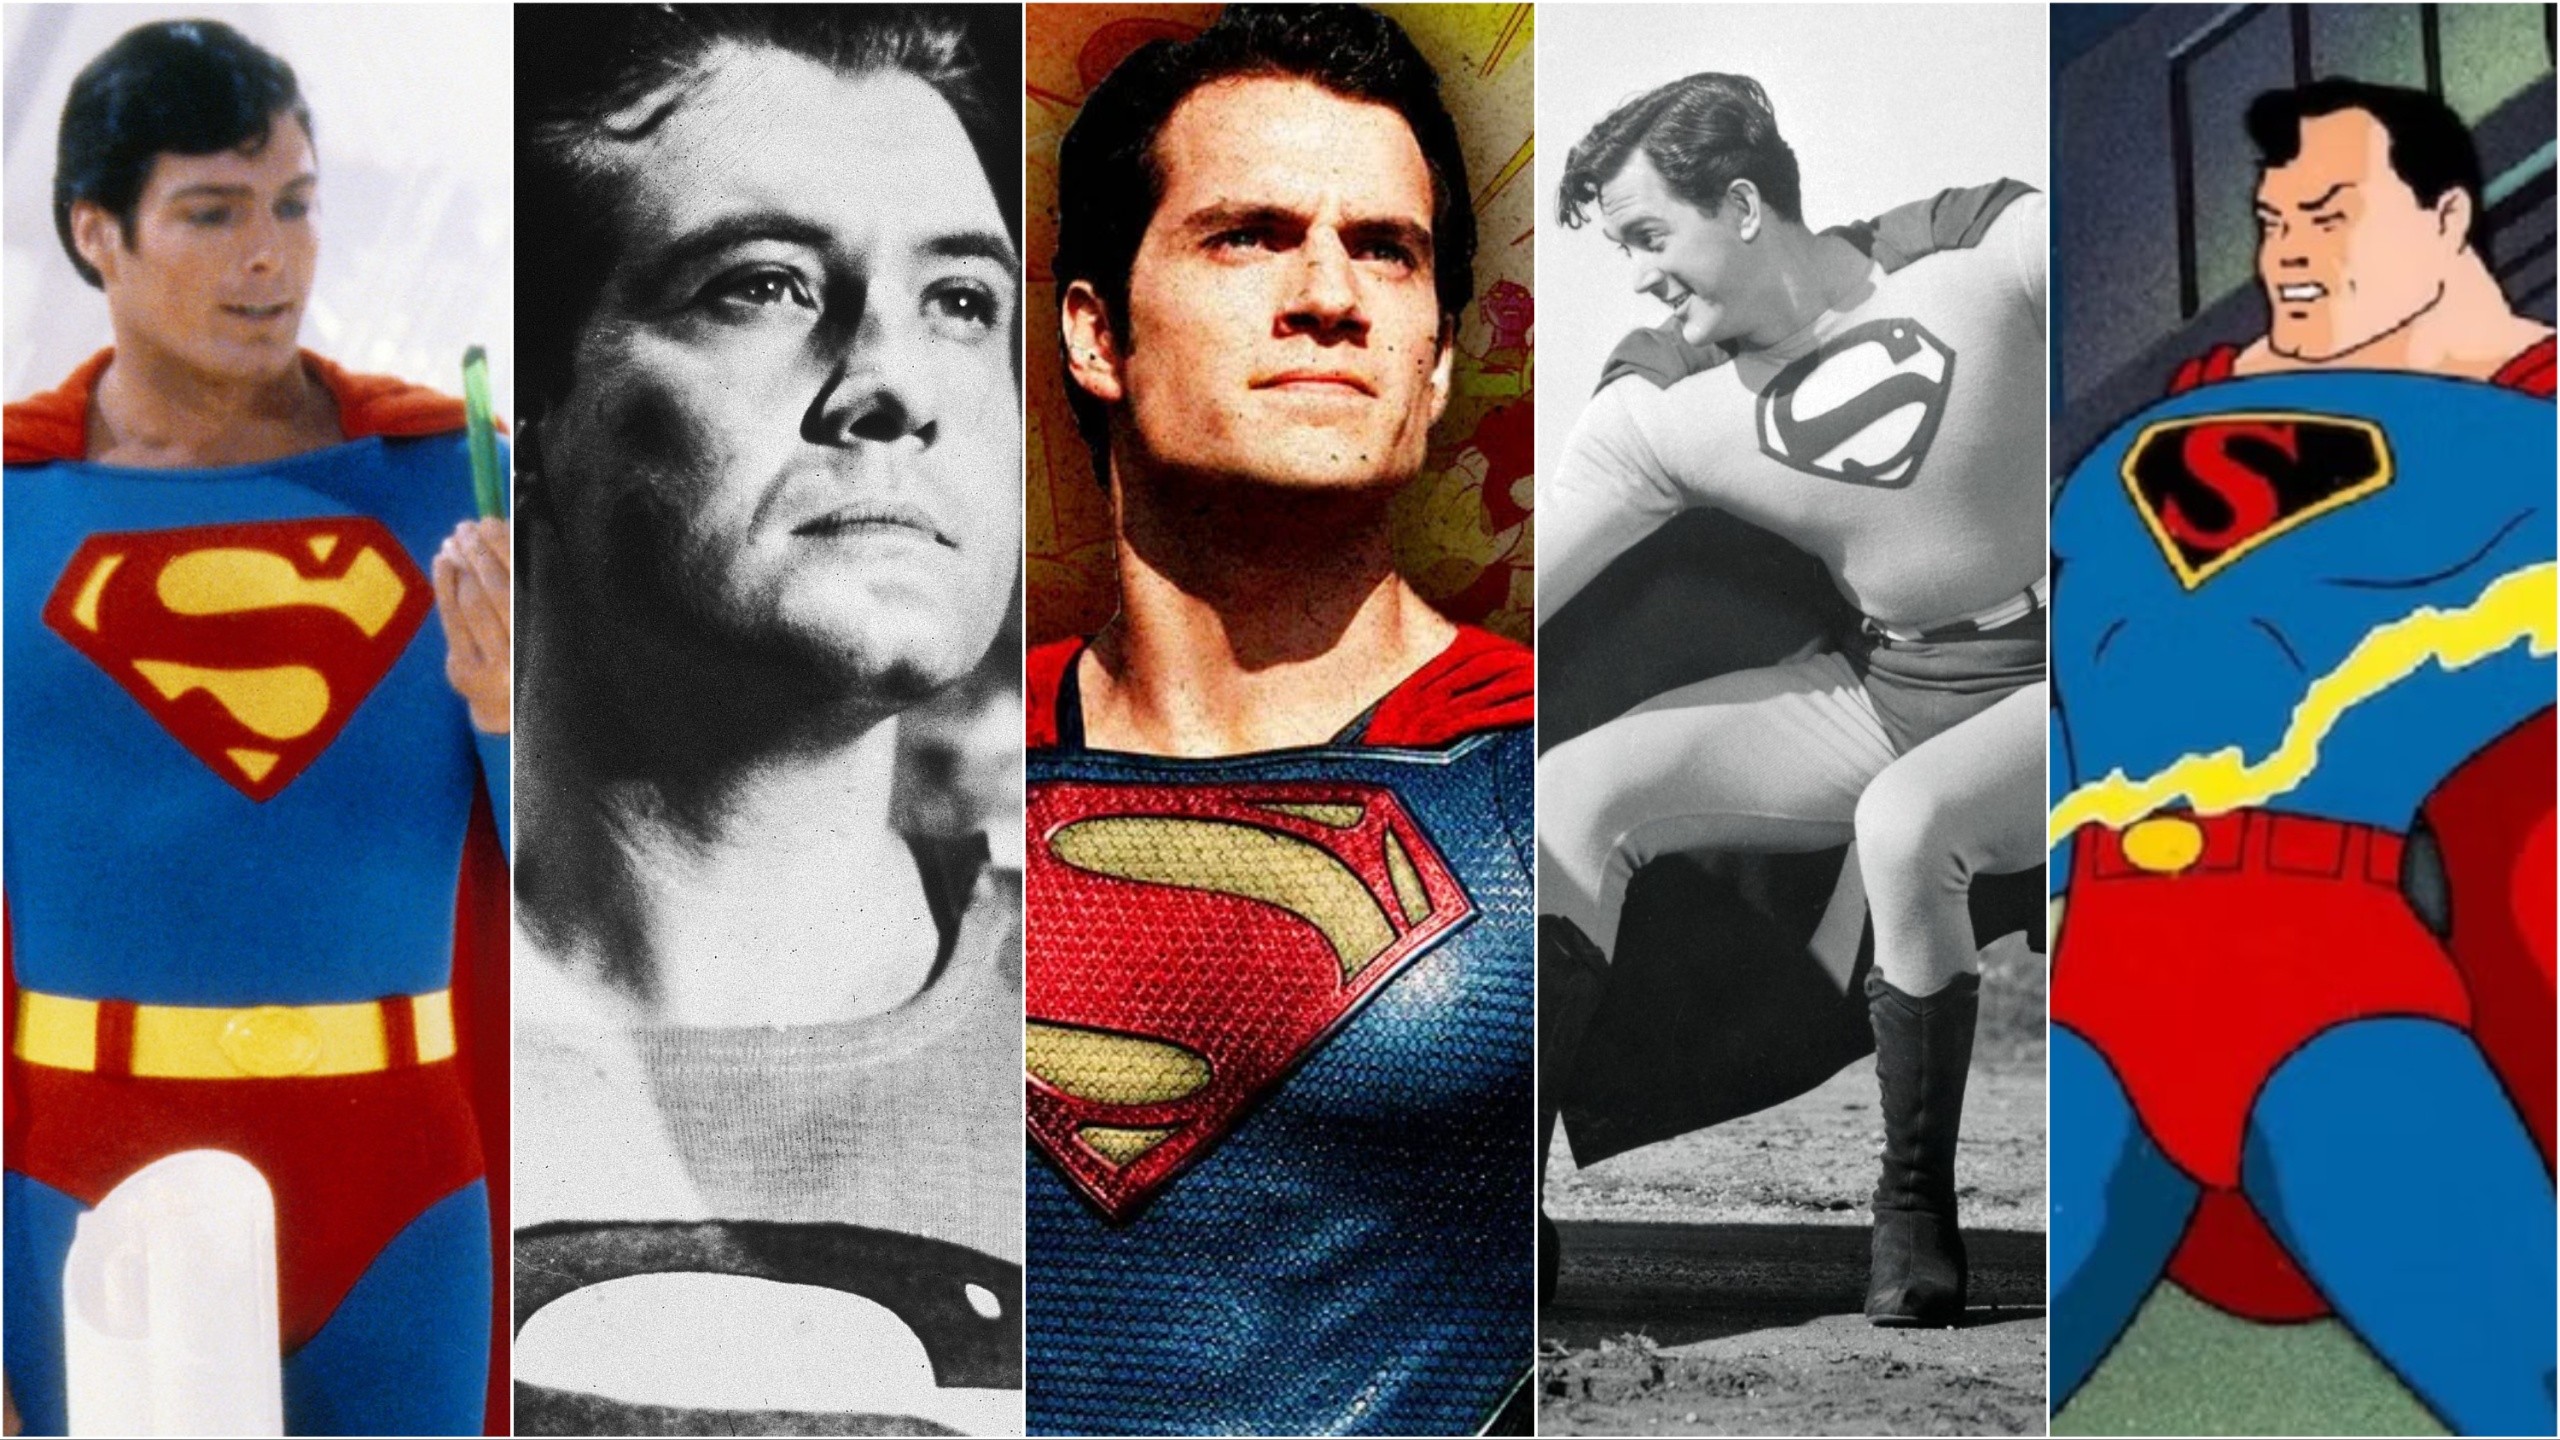 WB worried Henry Cavill is too old to play Superman?